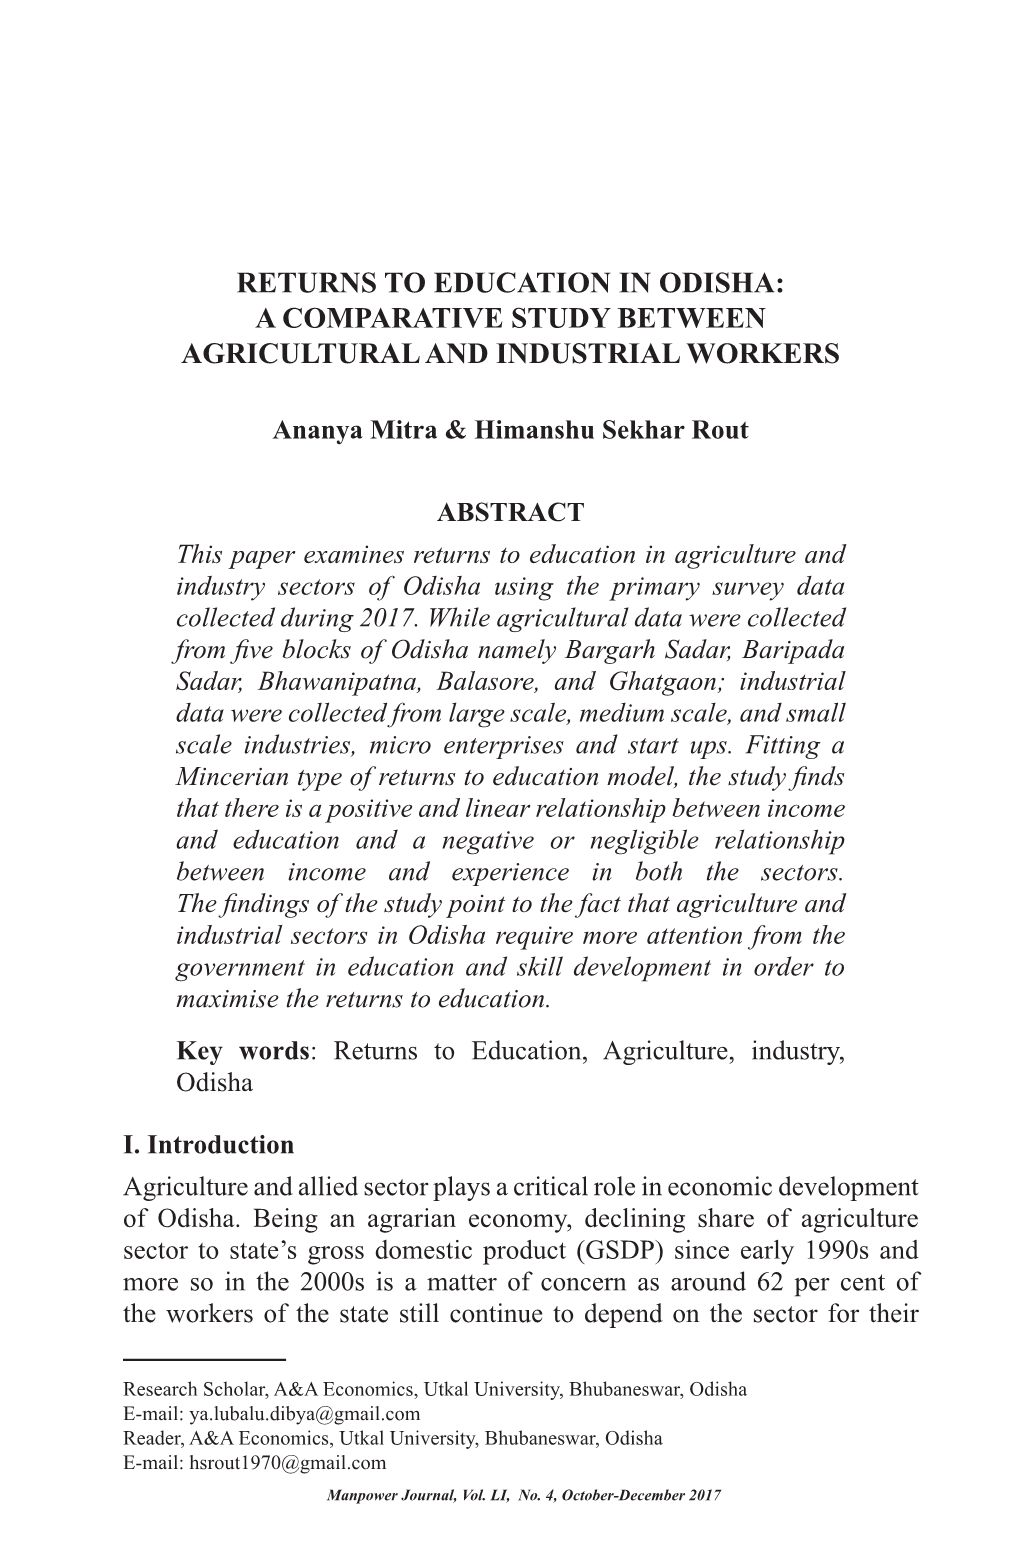 Returns to Education in Odisha: a Comparative Study Between Agricultural and Industrial Workers